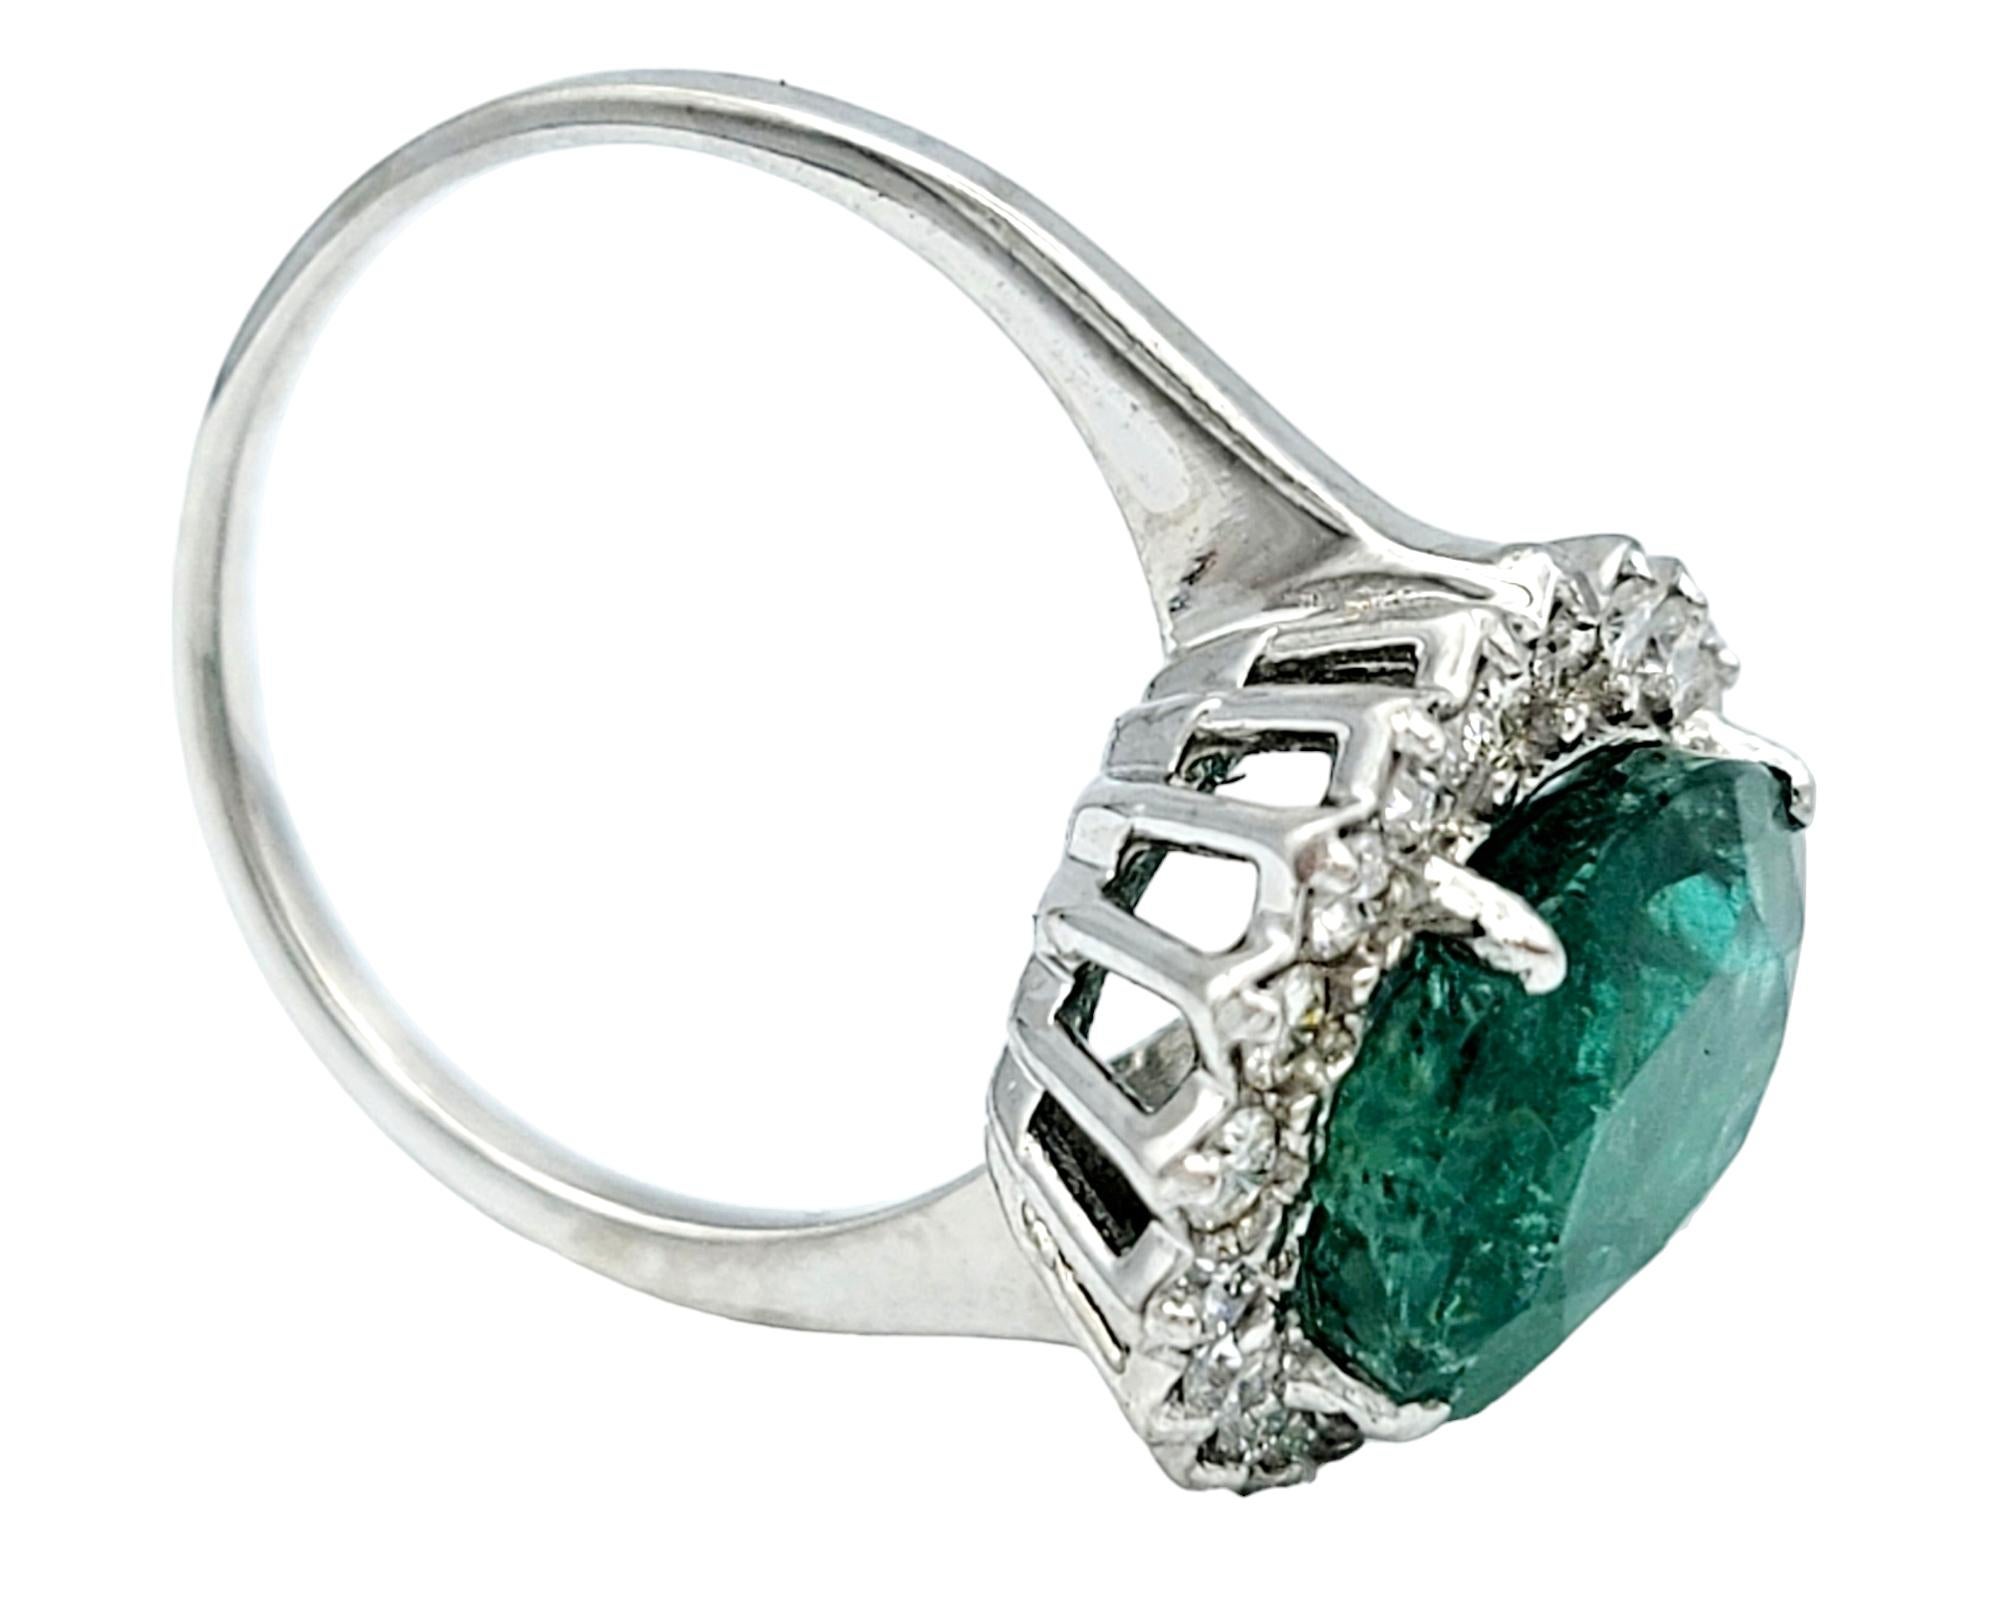 4.98 Carat Oval Cut Emerald and Diamond Halo Ring Set in 18 Karat White Gold For Sale 1